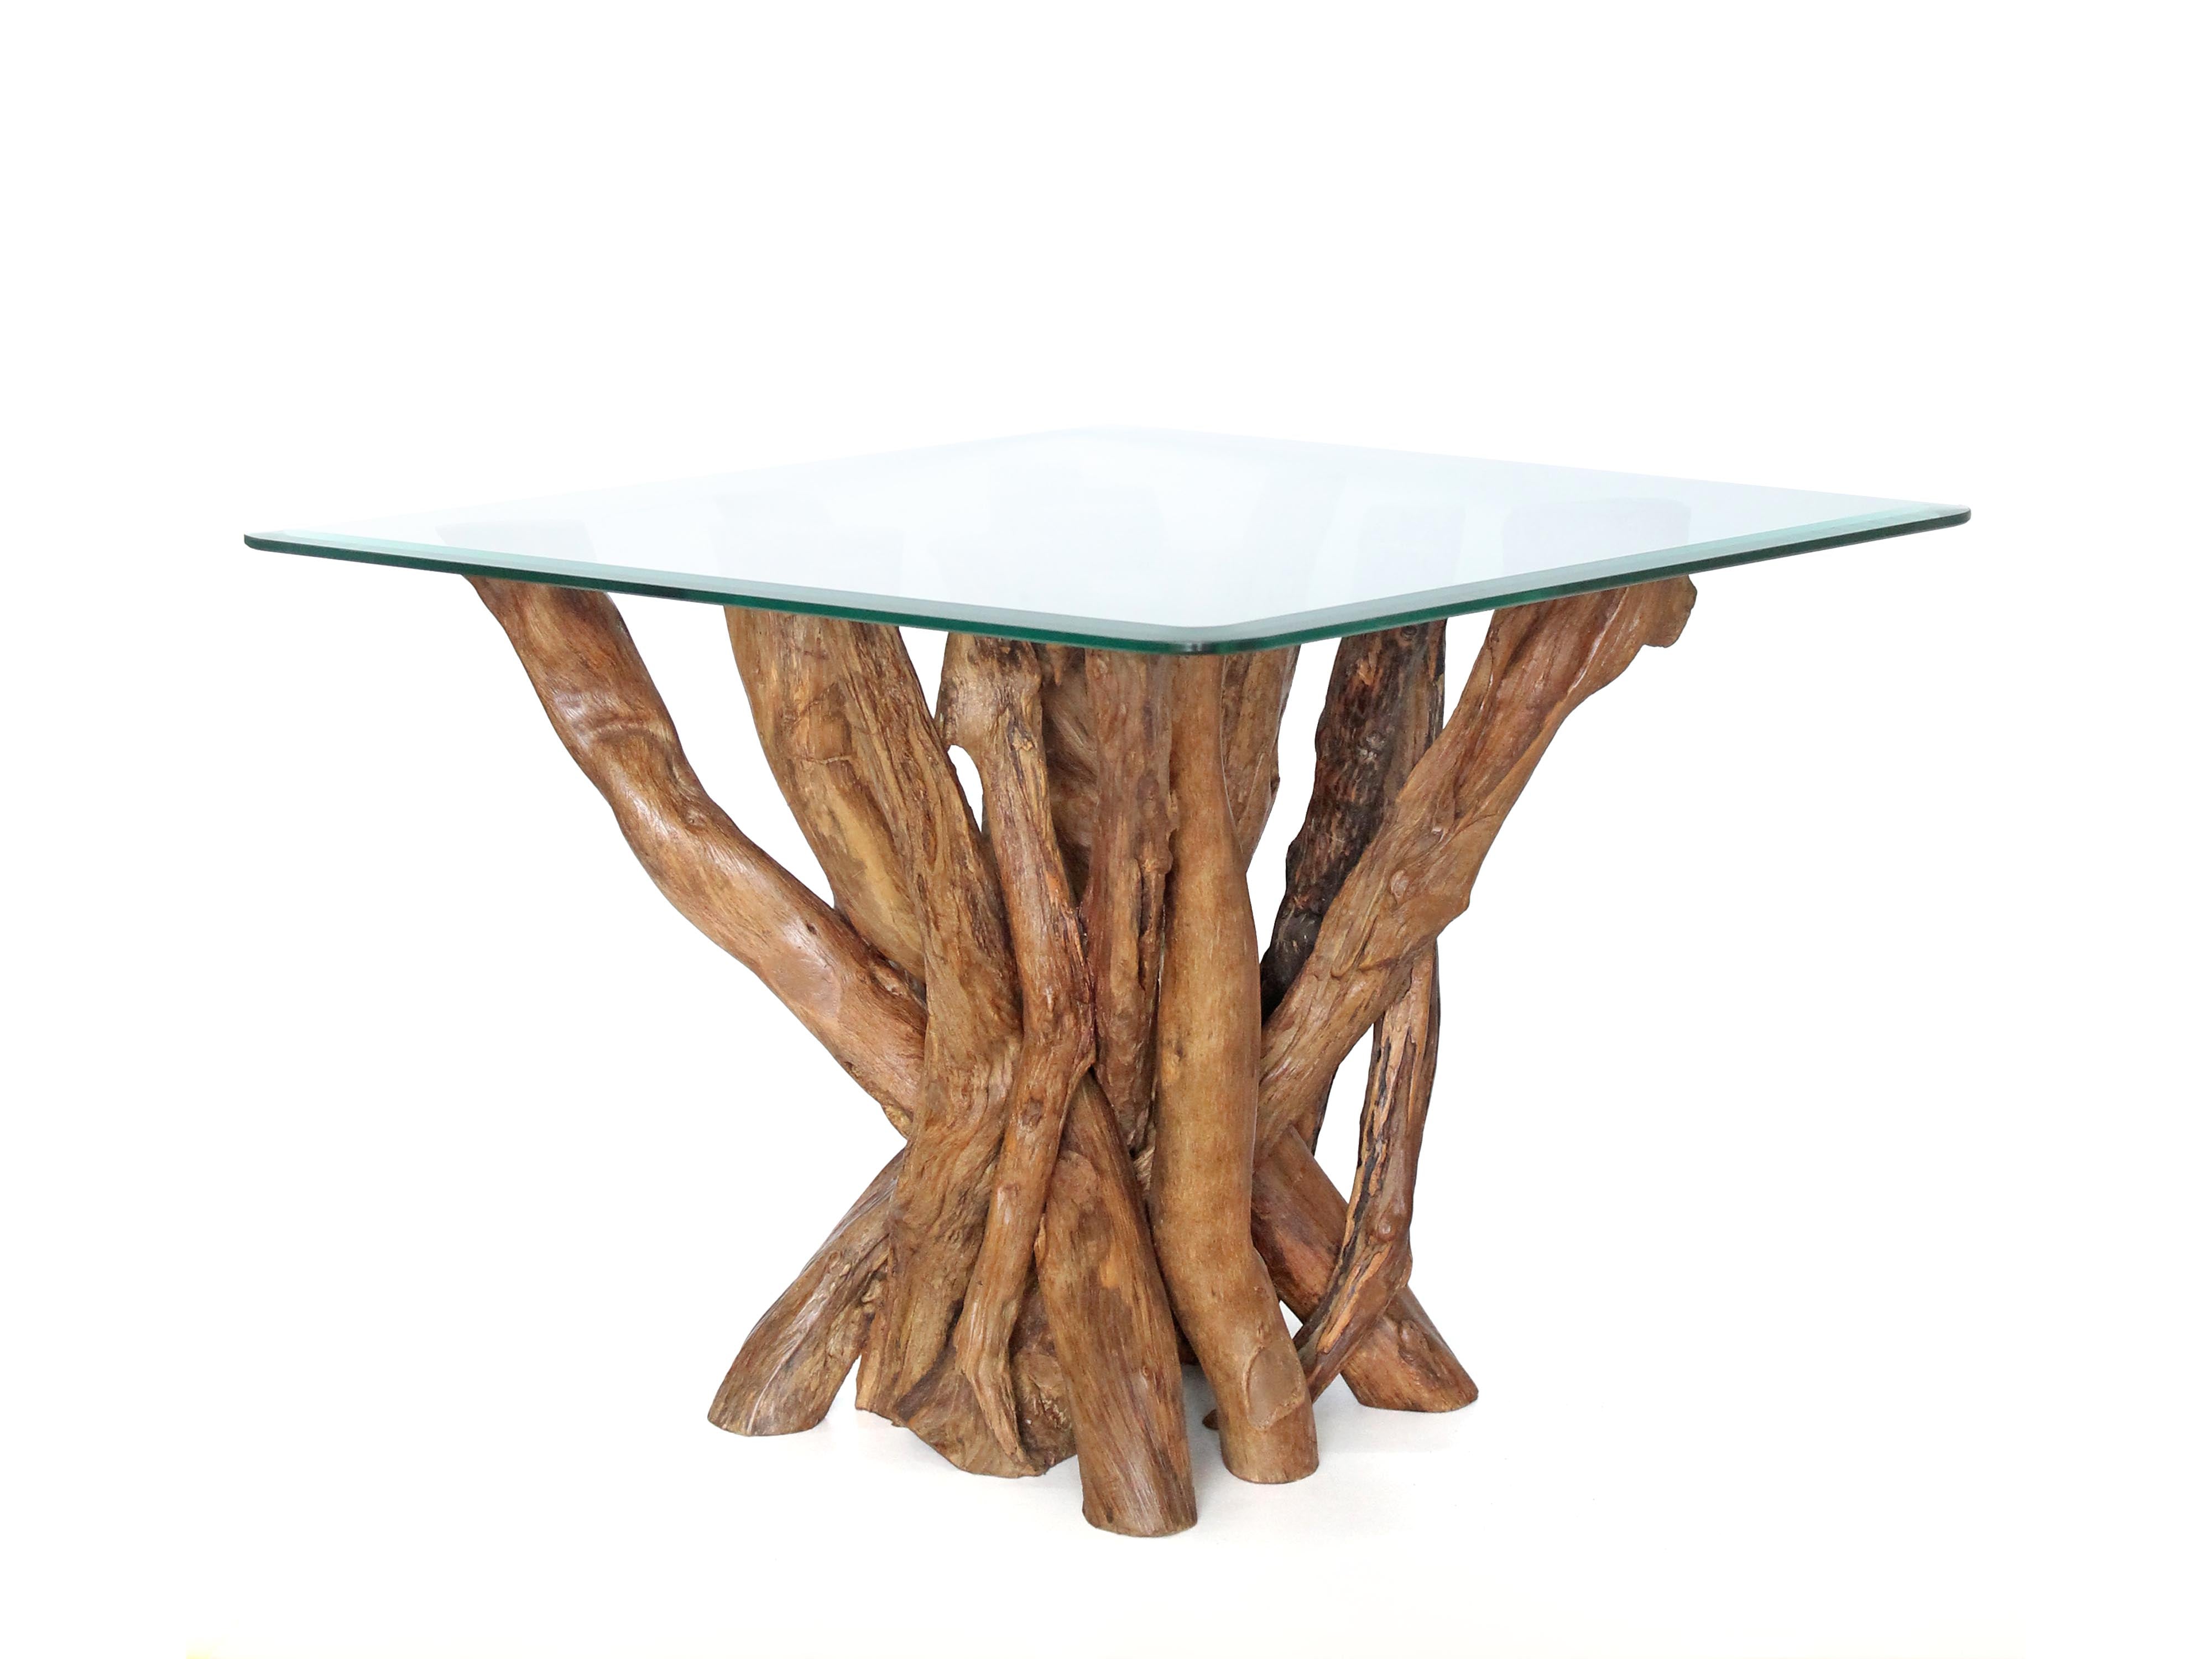 Driftwood Branches Natural Waxed Side Table